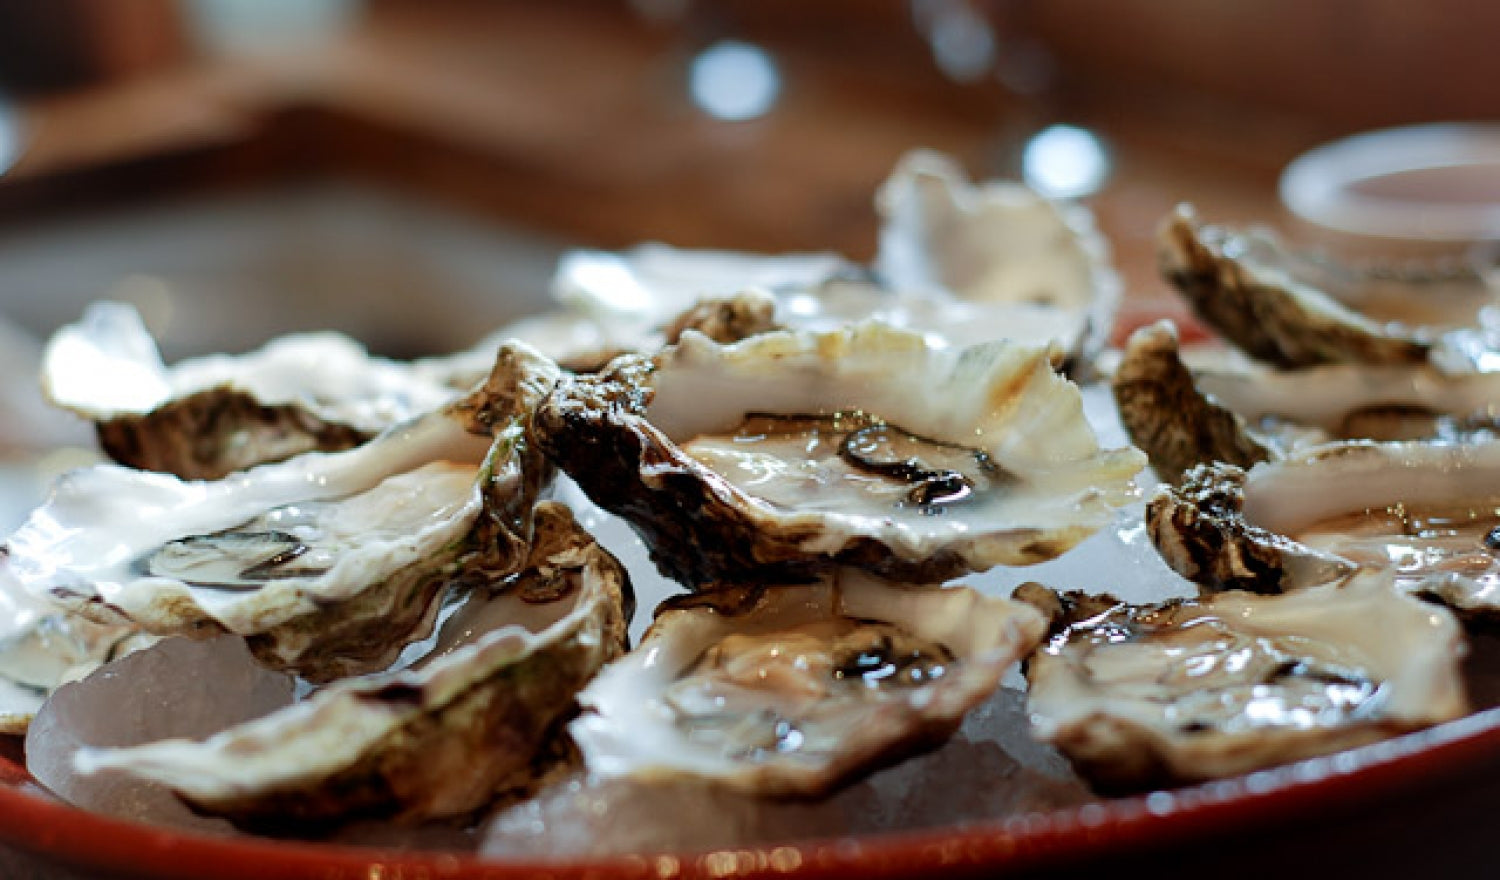 Step By Step Guide: How To Open An Oyster